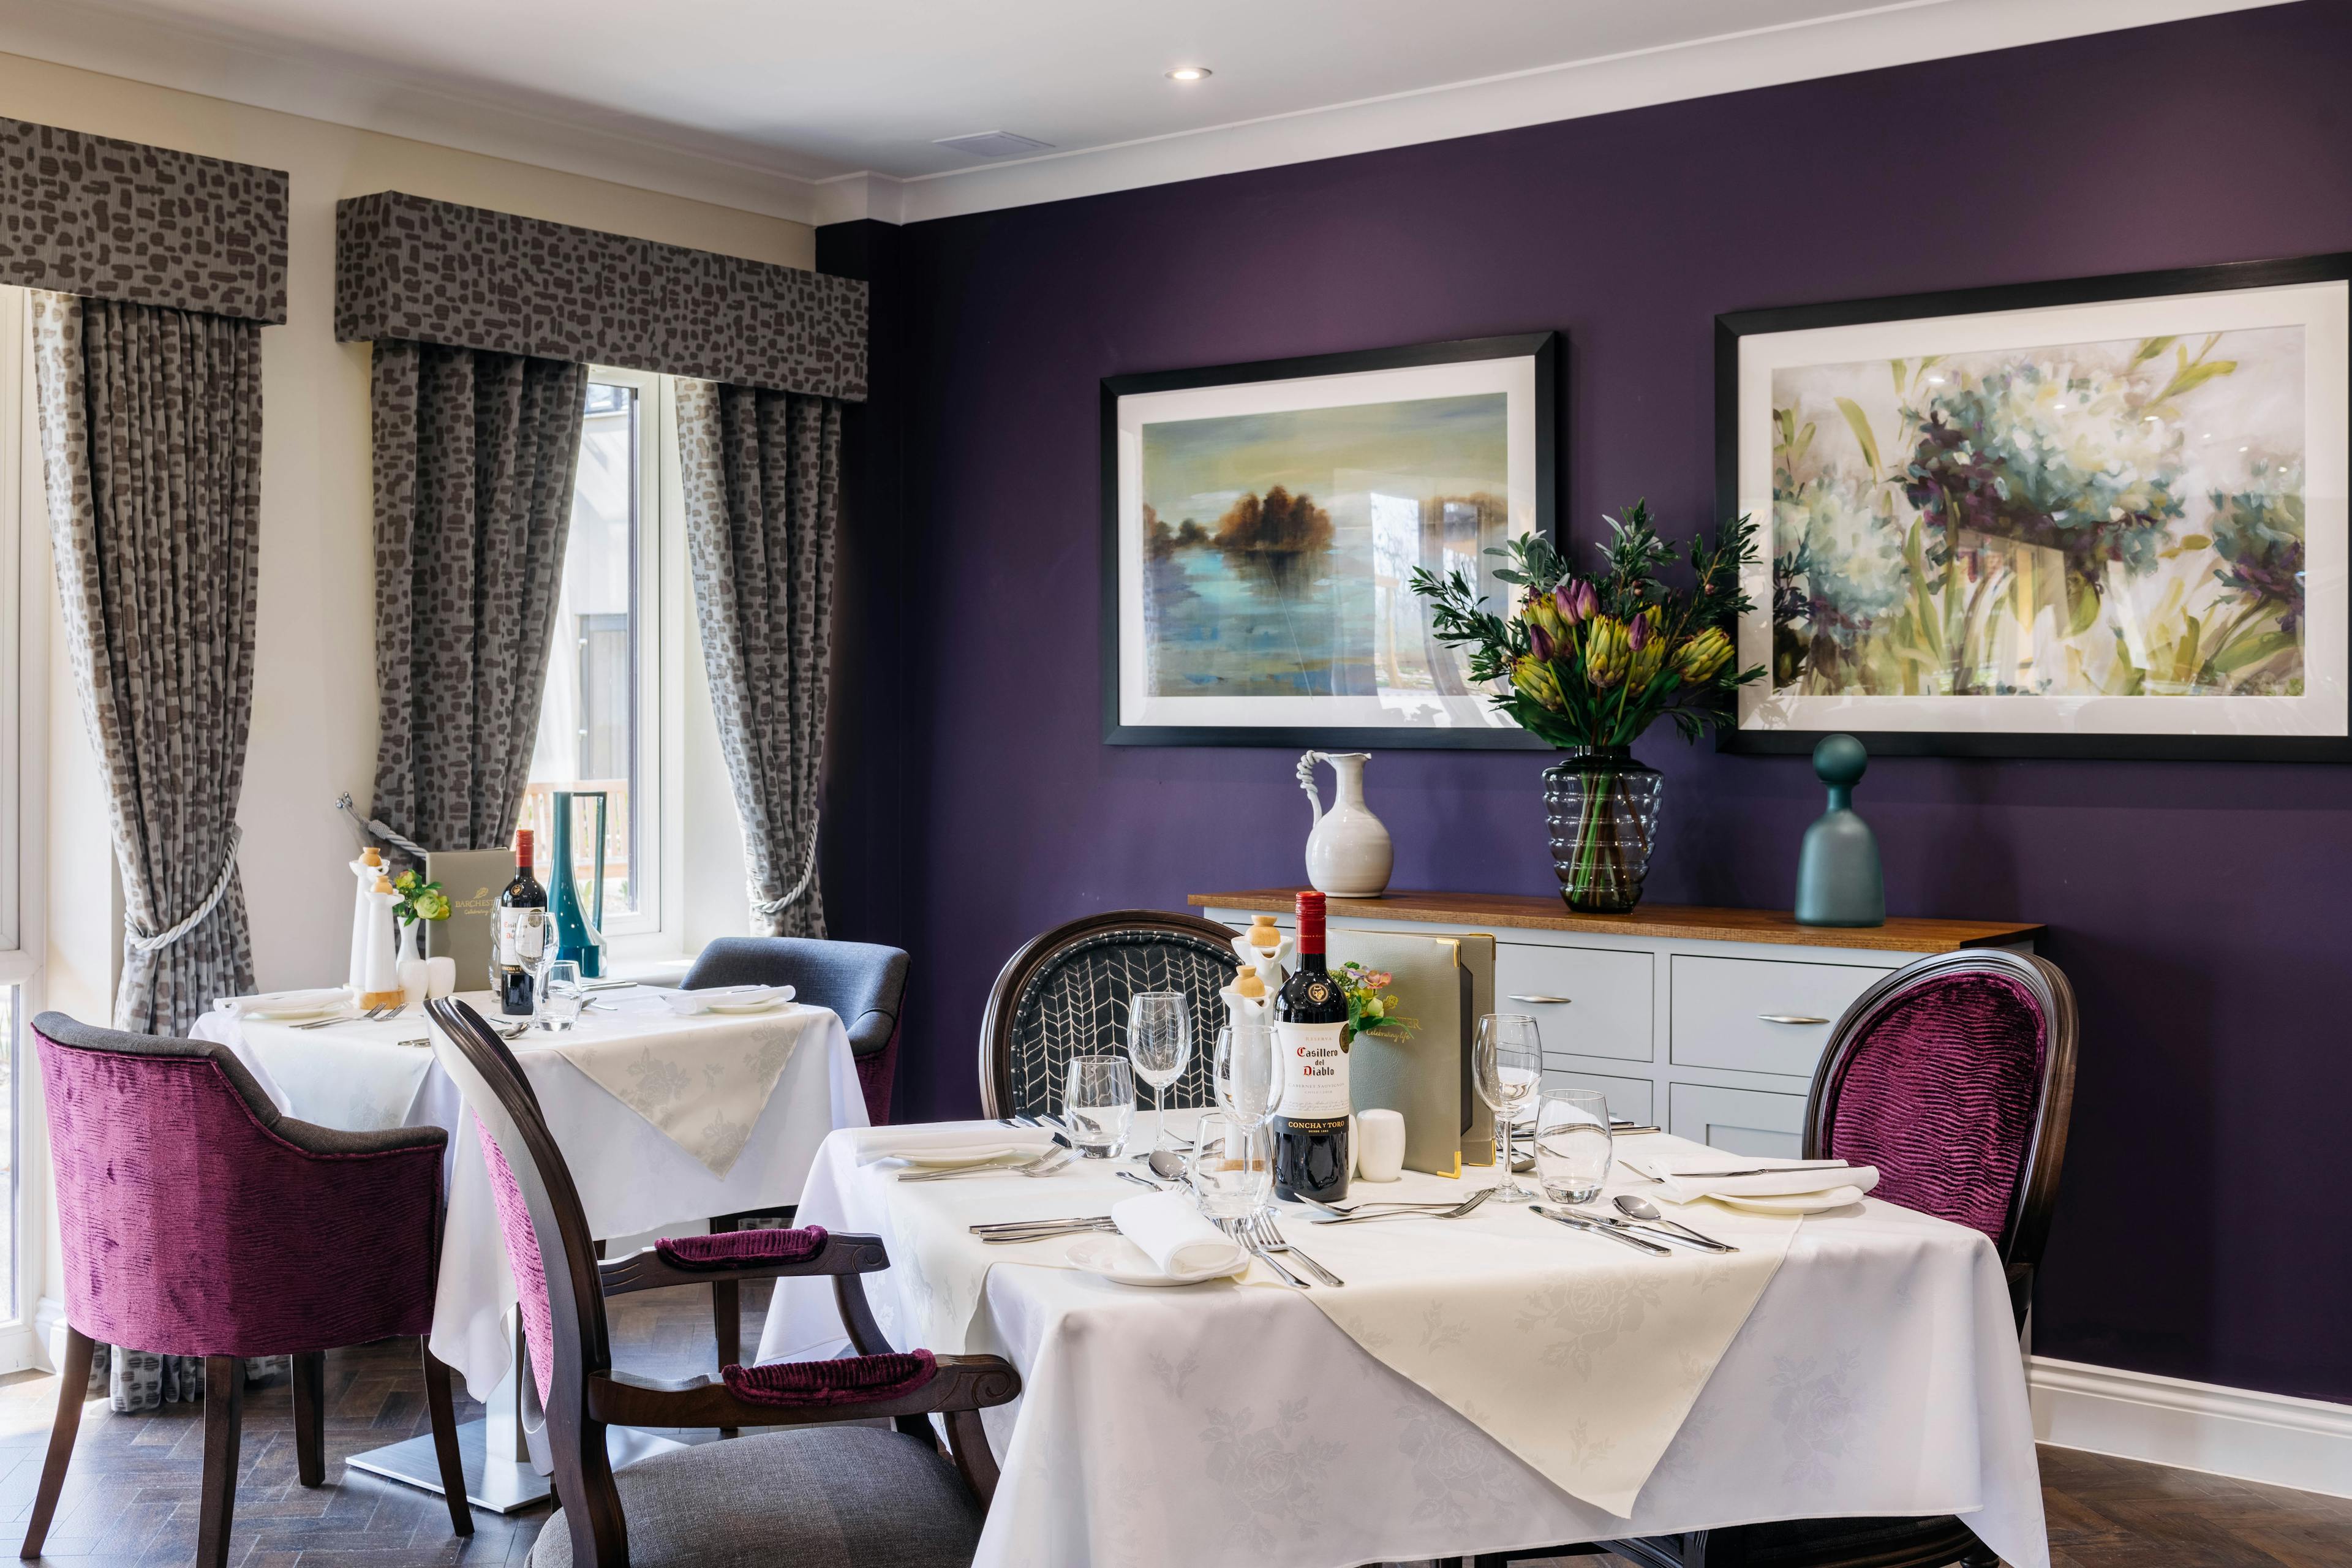 Dining Room at Snowdrop Place Care Home in Southampton, Hampshire